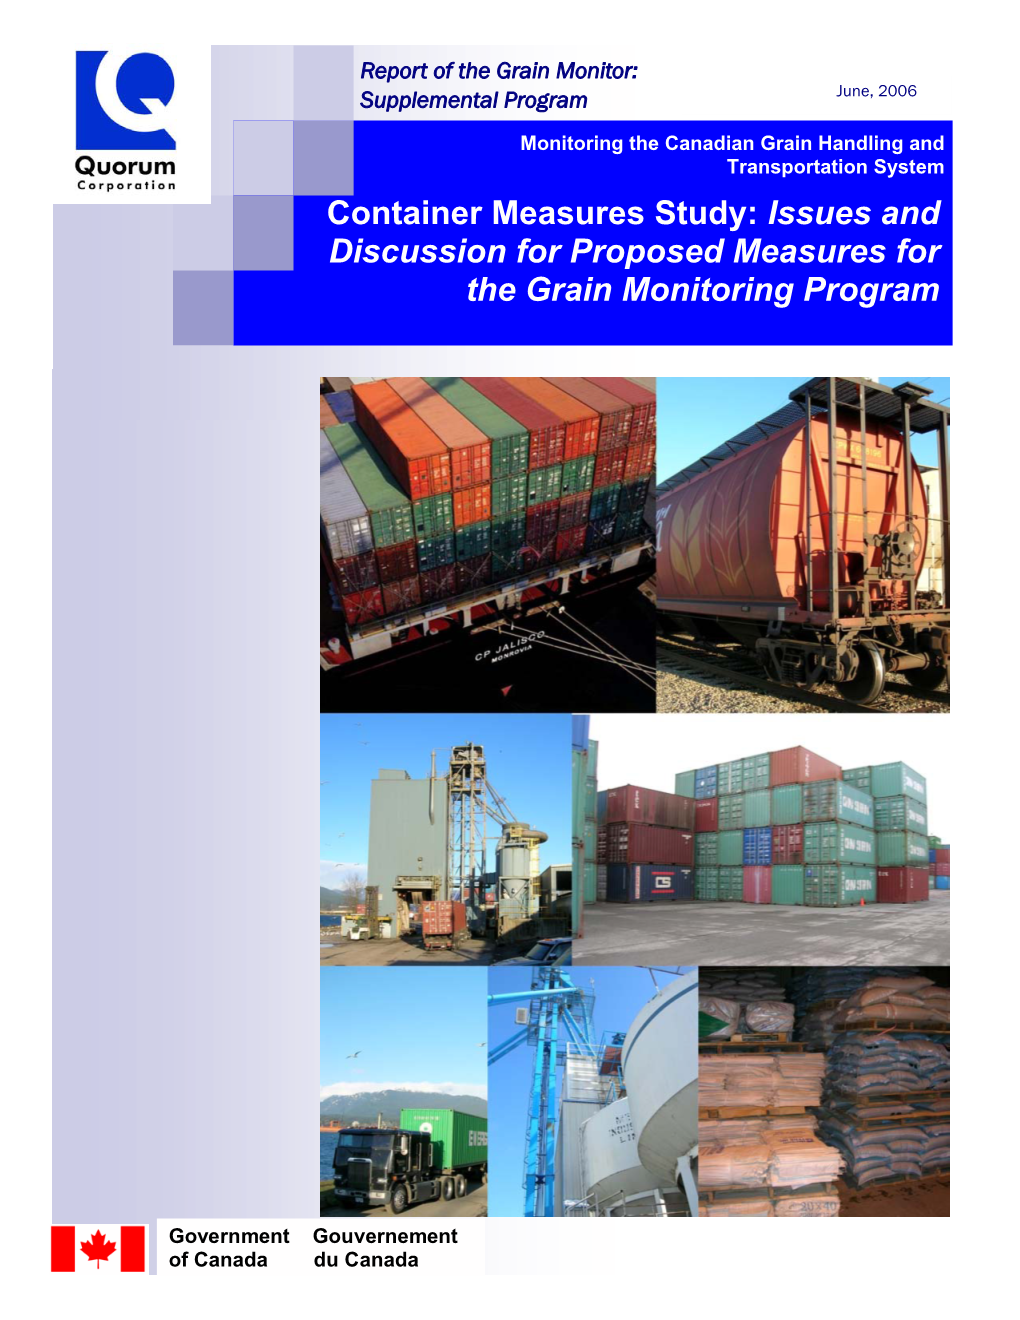 Container Measures Study: Issues and Discussion for Proposed Measures for the Grain Monitoring Program